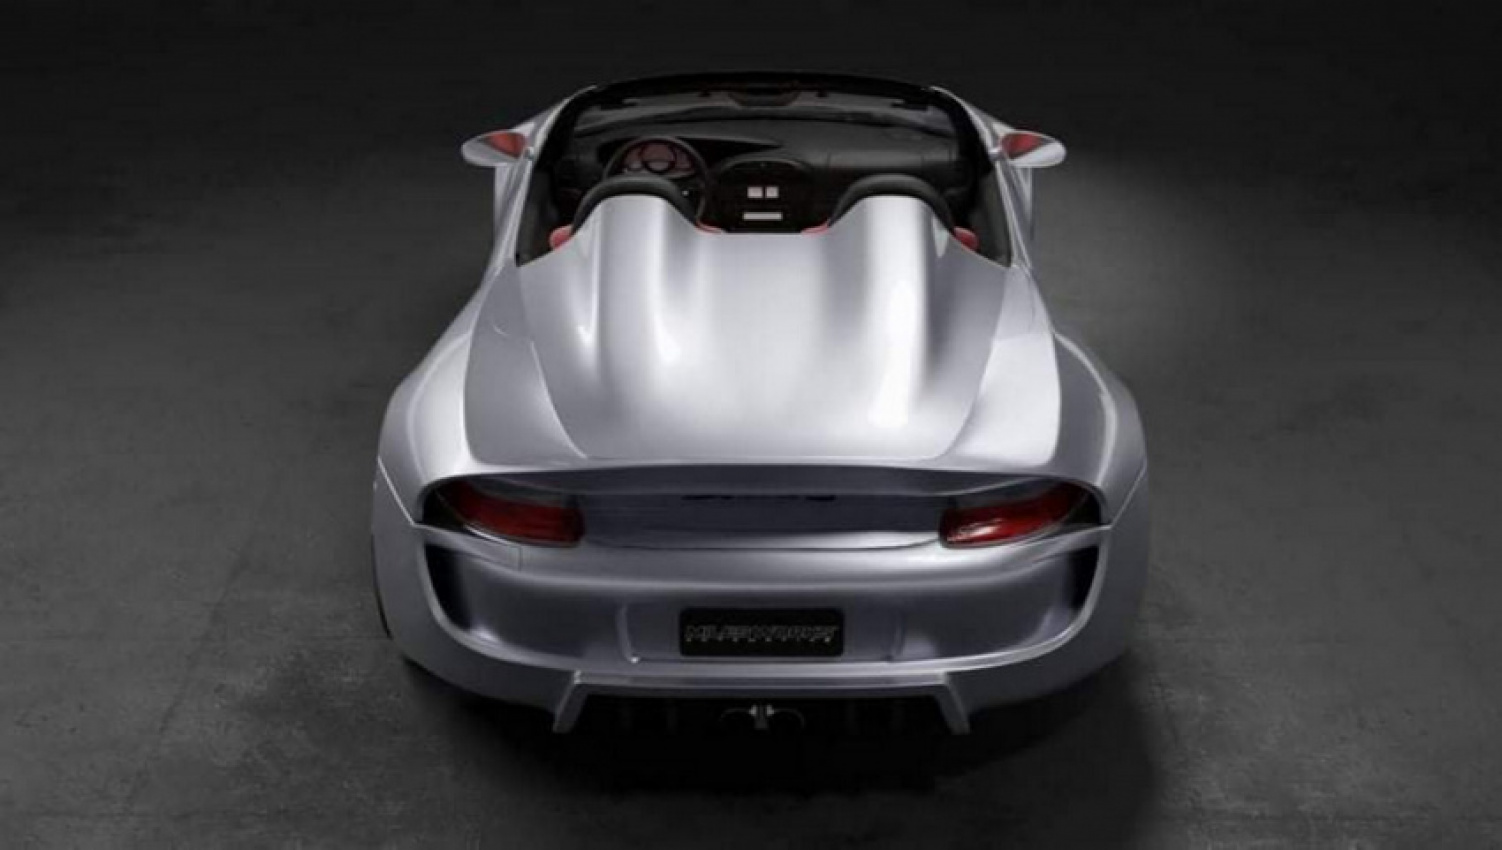 autos, cars, news, porsche, porsche boxster, renderings, tuning, tuner teases porsche boxster mk1 with widebody kit, speedster rear and duck tail spoiler